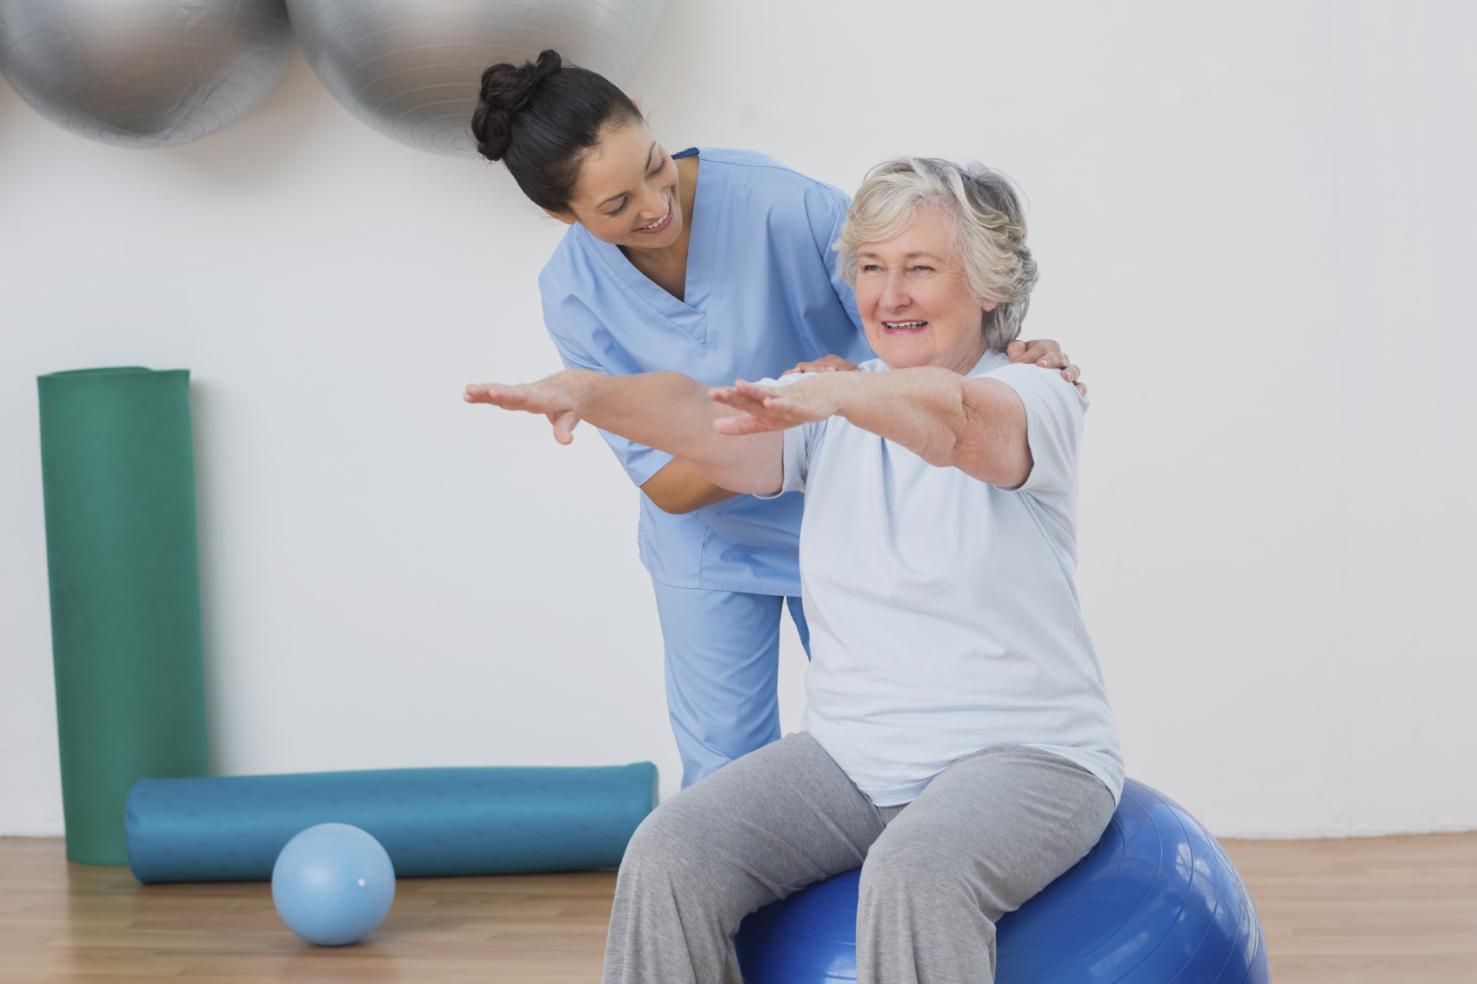 What Are the Benefits of Occupational Therapy for Individuals with Chronic Conditions?